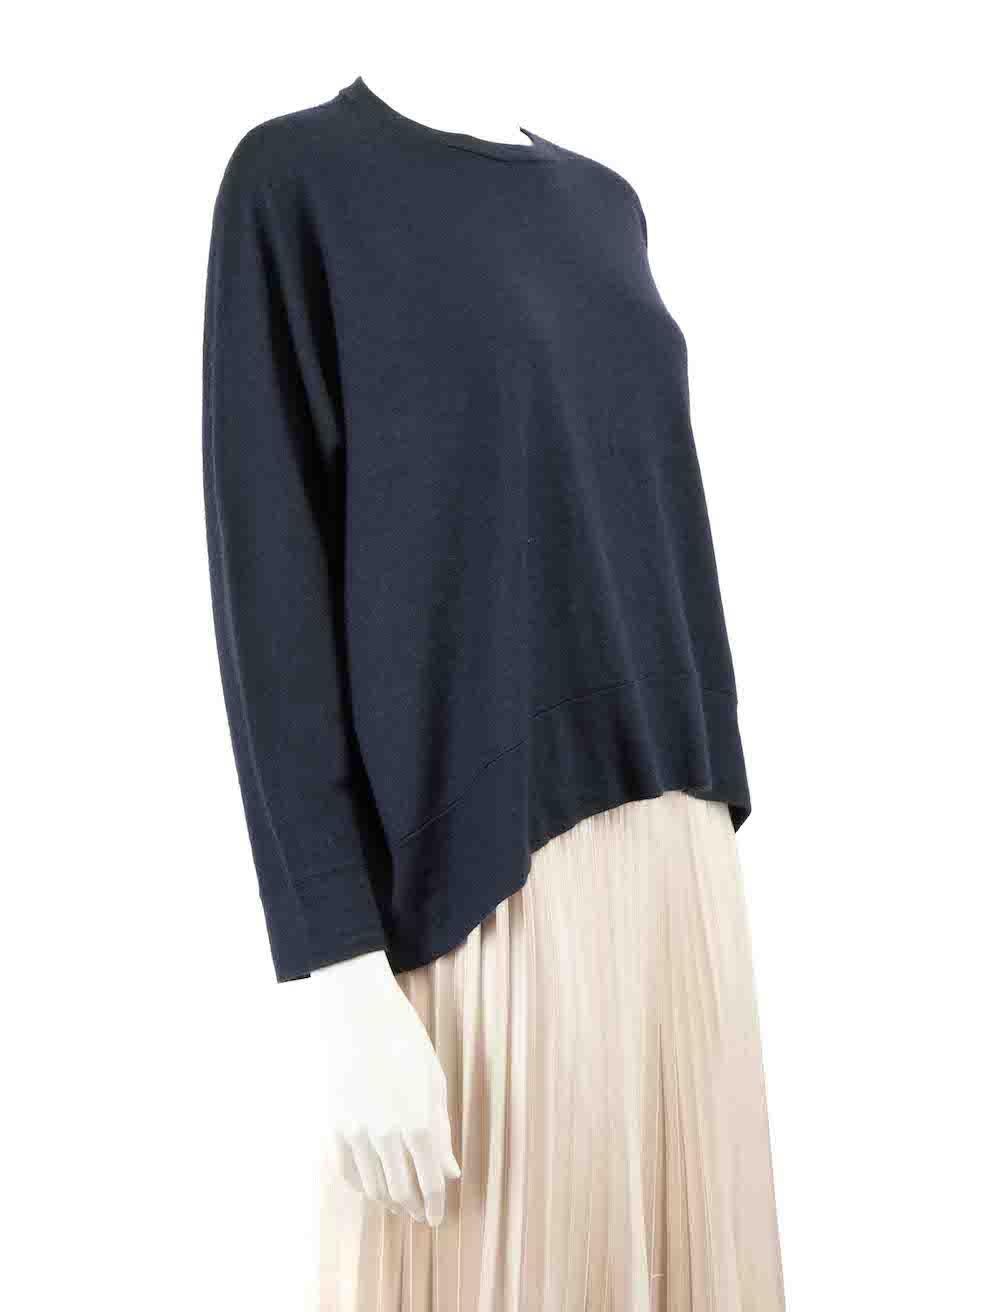 CONDITION is Never worn. No visible wear to jumper is evident on this new Brunello Cucinelli designer resale item.
 
 
 
 Details
 
 
 Navy
 
 Cashmere
 
 Knit top
 
 Round neck
 
 Long sleeves
 
 
 
 
 
 Made in Italy
 
 
 
 Composition
 
 70%